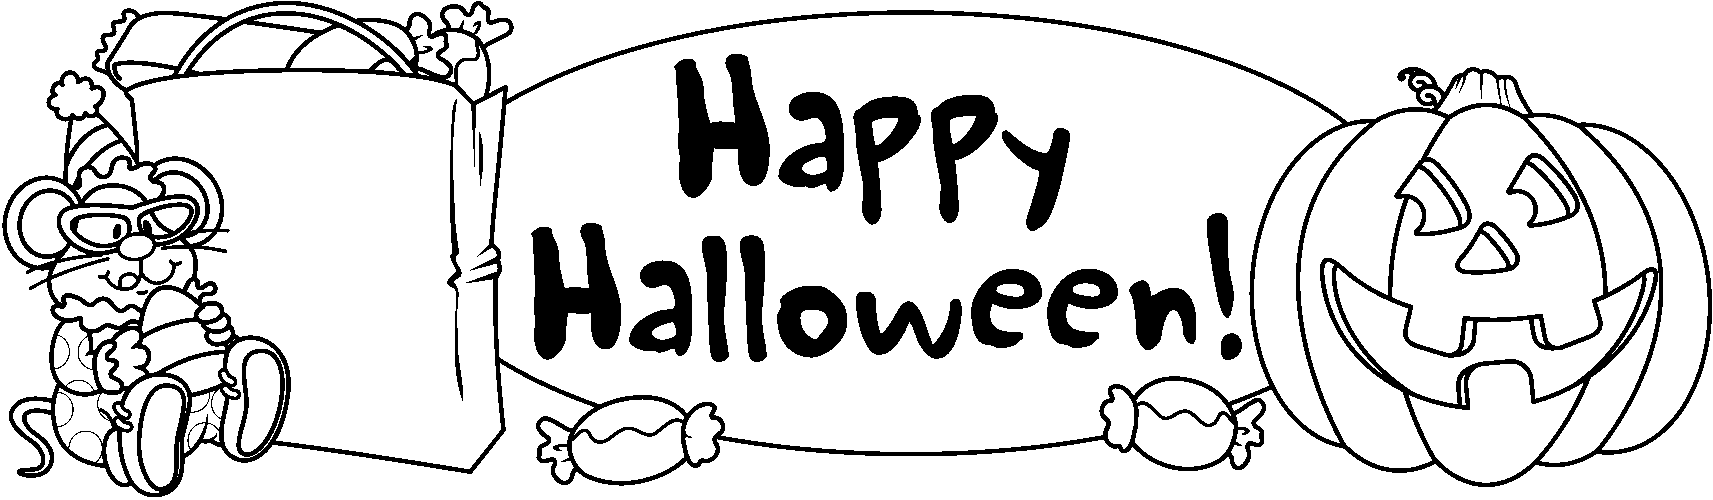 Happy Halloween Clip Art Blac - Halloween Black And White Clipart